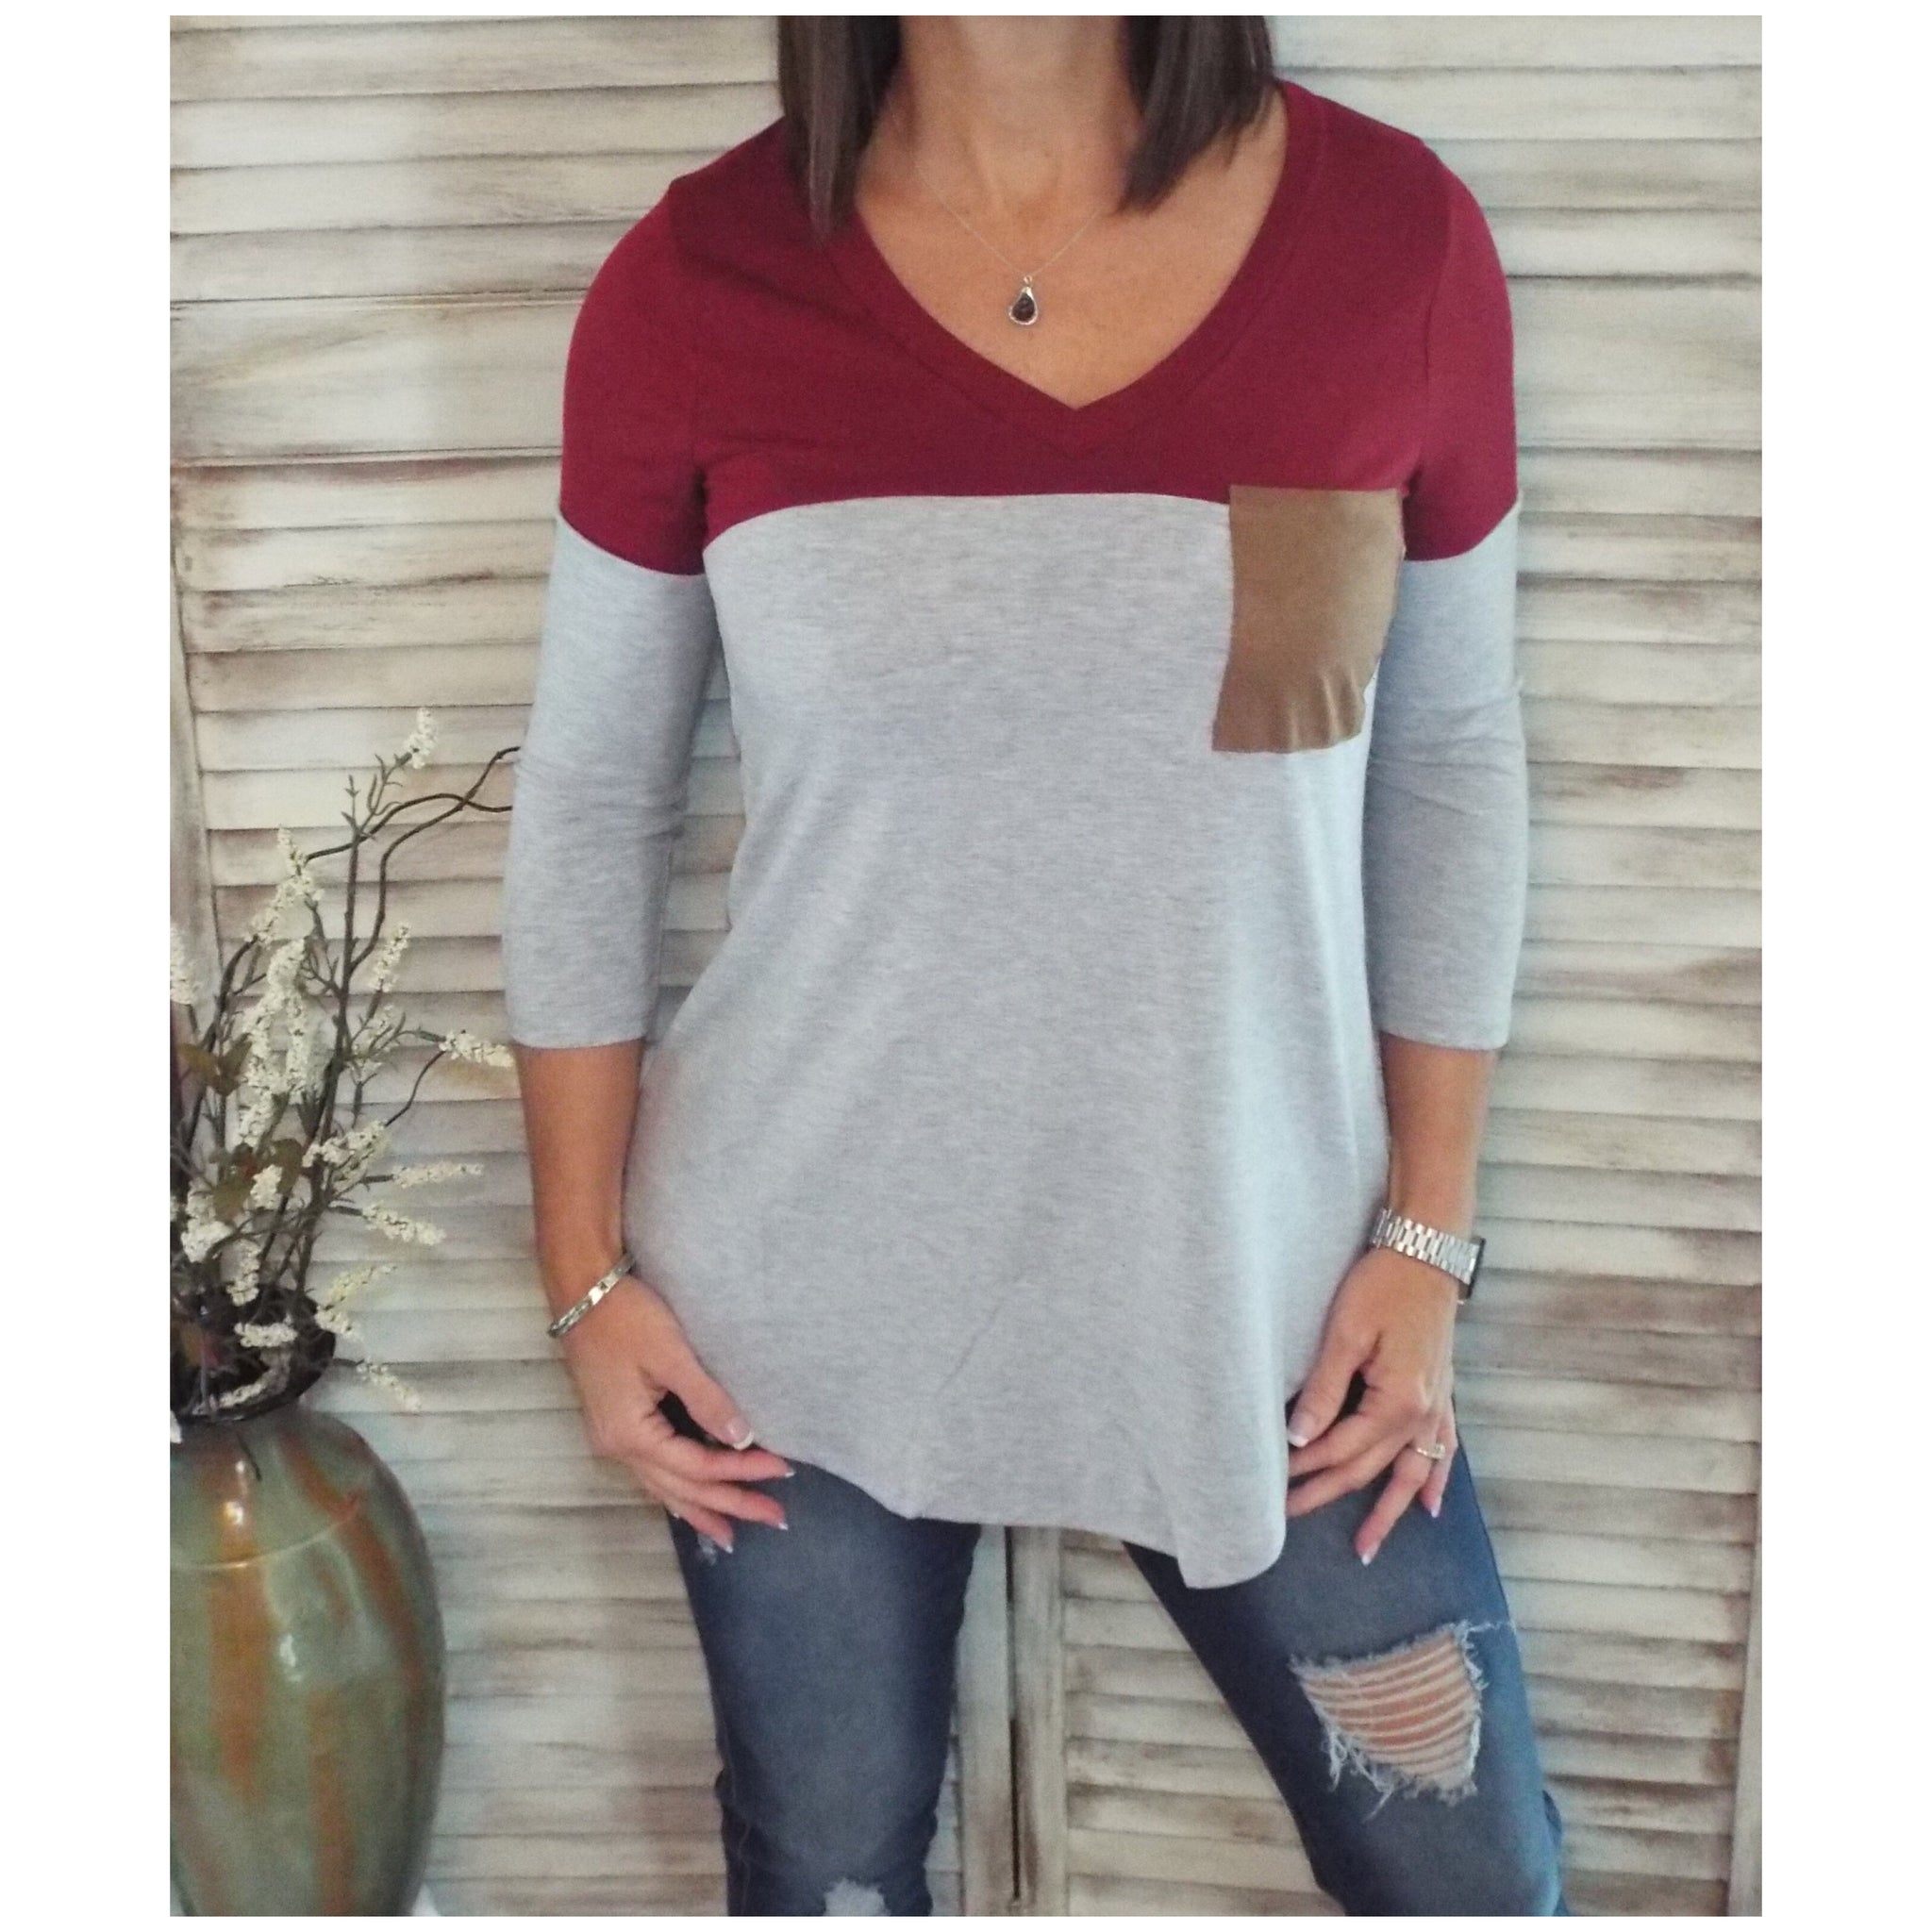 Suede Pocket Elbow Detail V-Neck Floaty Tunic 3/4 Sleeve Wine Gray S/M/L/XL